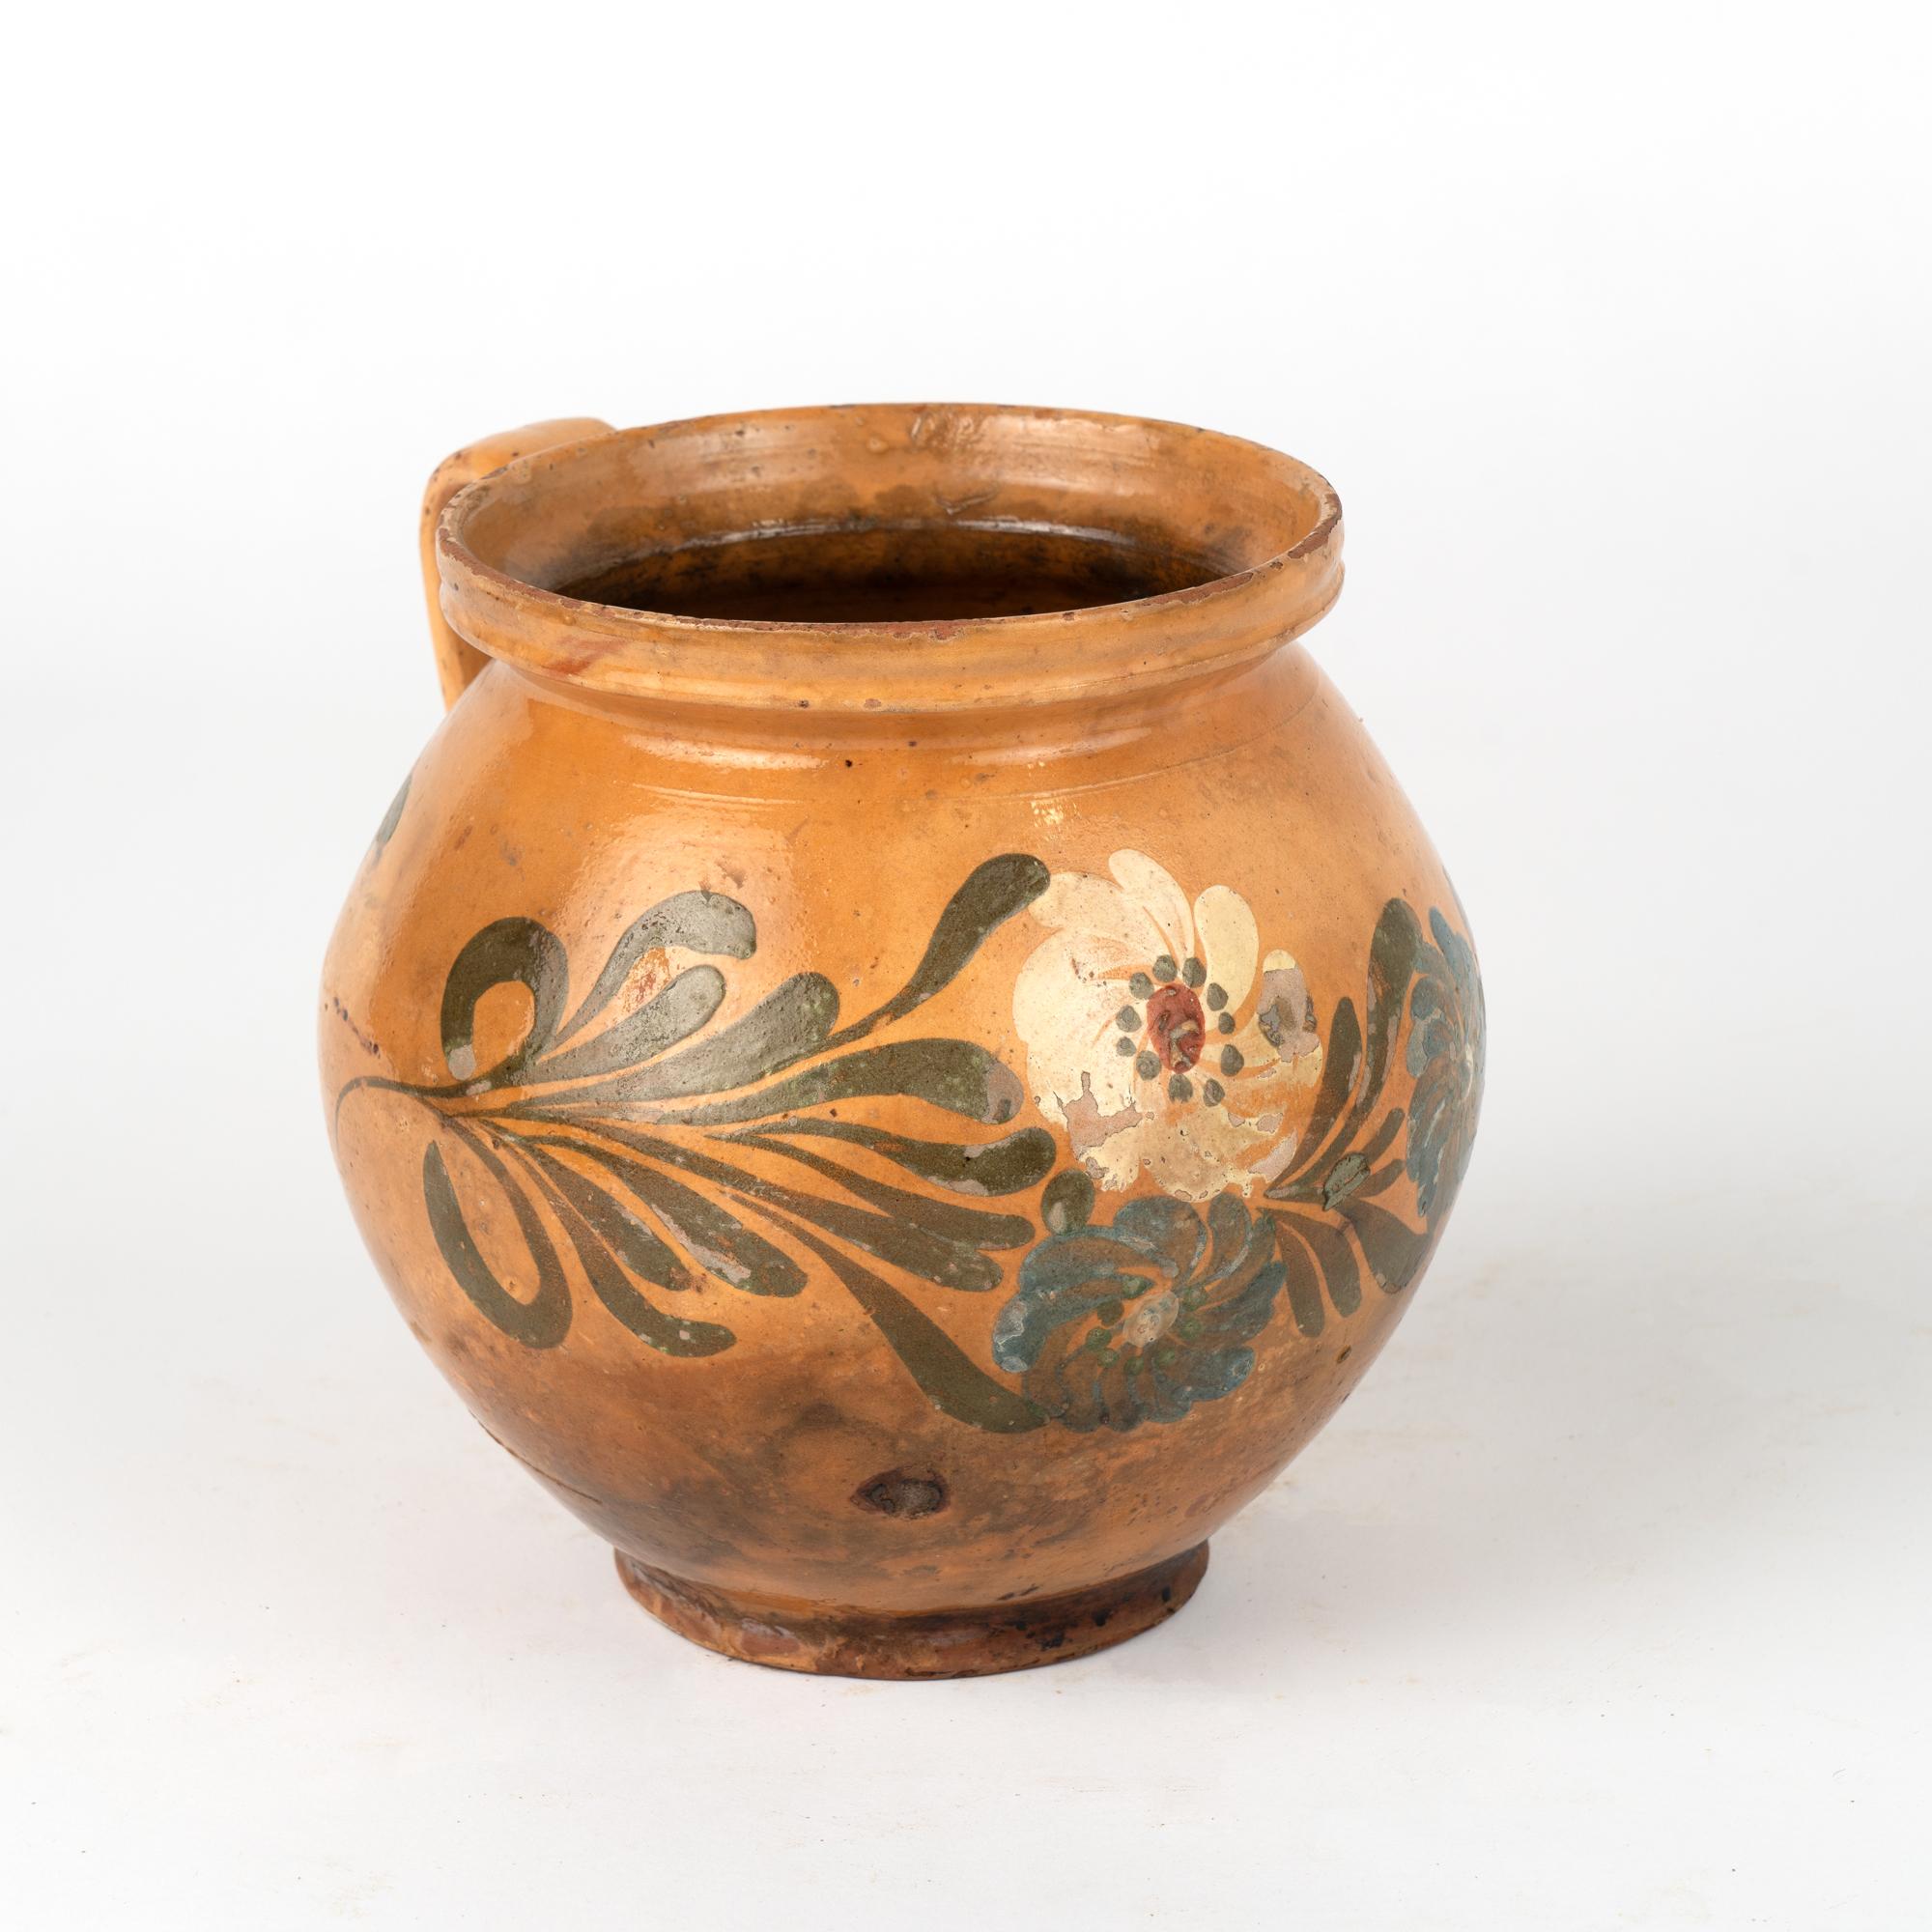 Original hand painted earthenware pottery with handle. Terracotta background with floral and leaf/vine pattern.
Sold in original vintage used condition. Any chips, cracks, stains, distress to paint or pottery is reflective of age and use. Solid